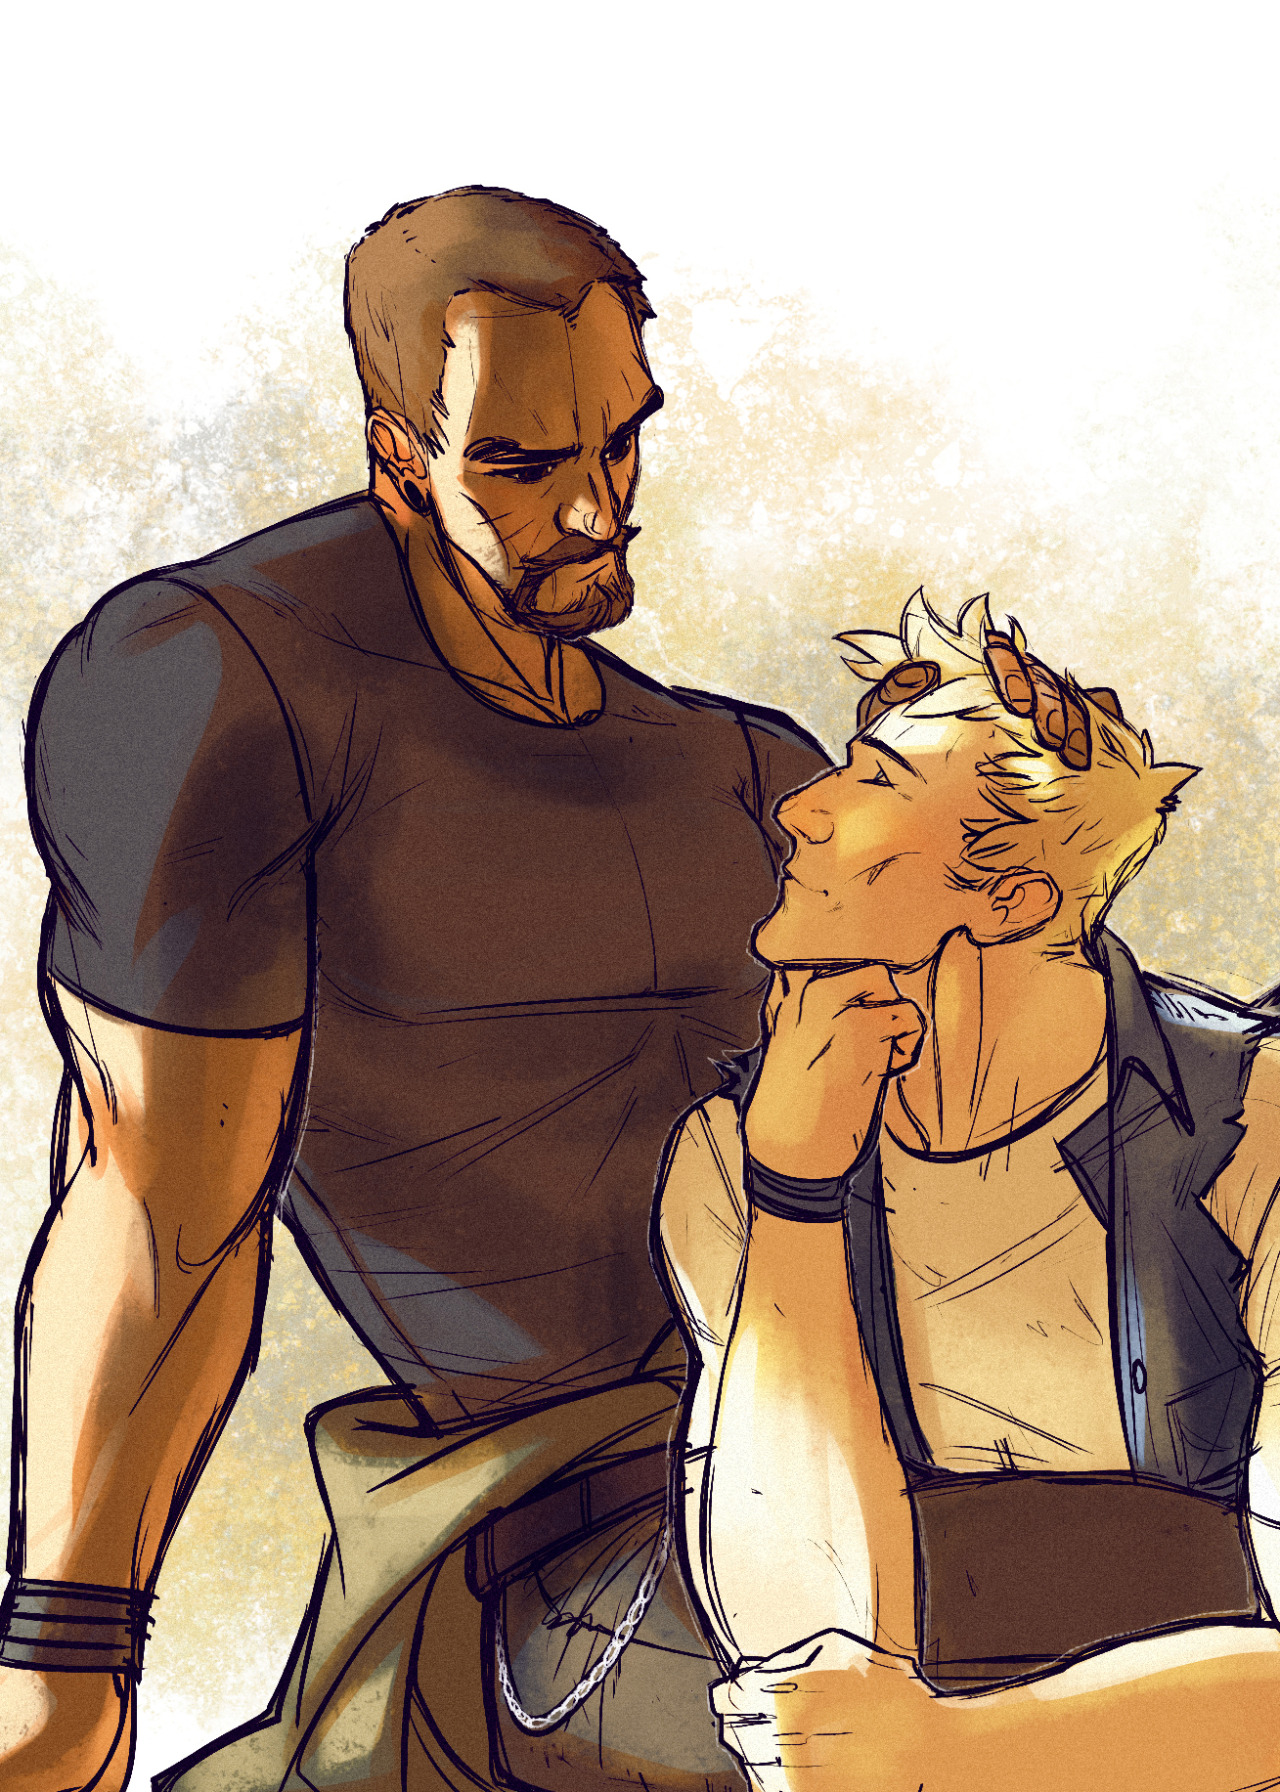 ufficiosulretro: Reaper76Week - Day 4: “On Holiday” (Time off) Pet the Golden